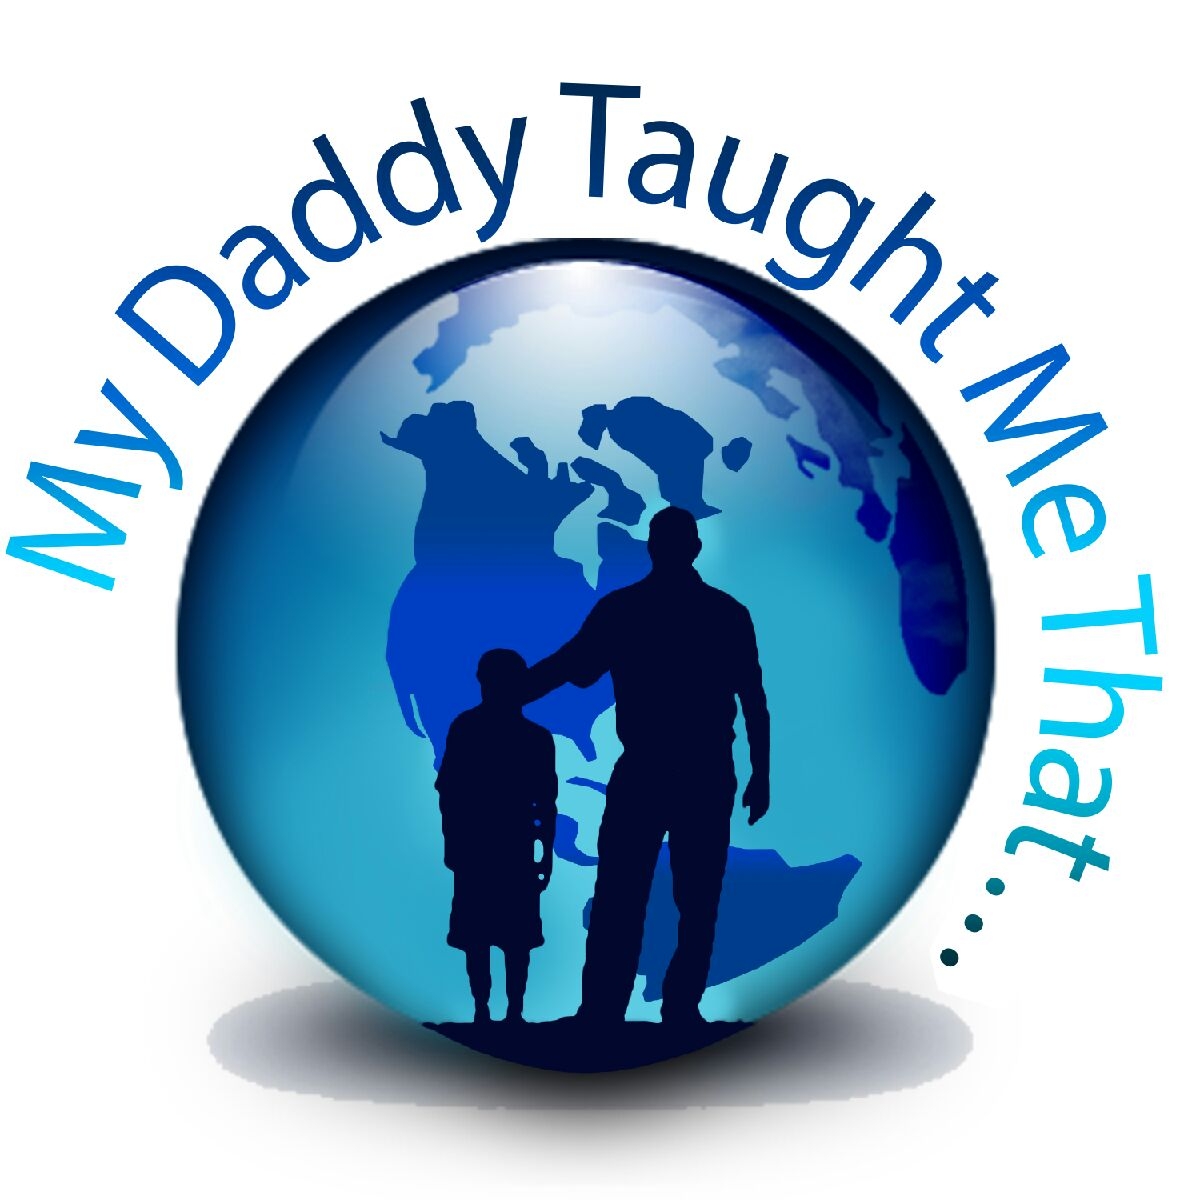 My Daddy Taught Me That - $25